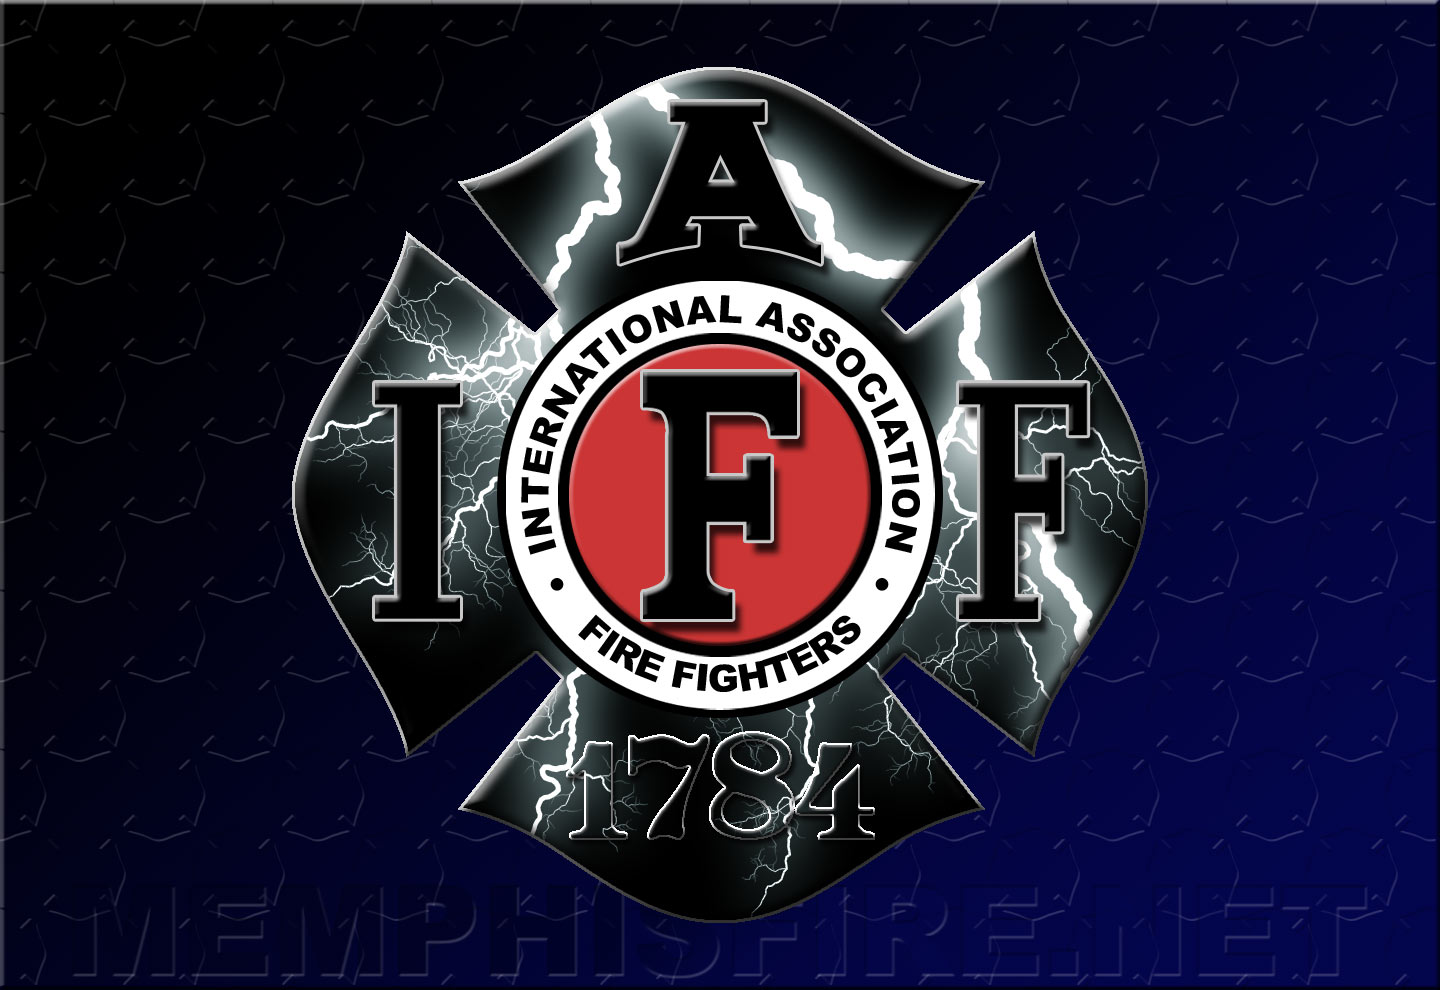 Pin Firefighter Wallpaper Desktop Image Search Results